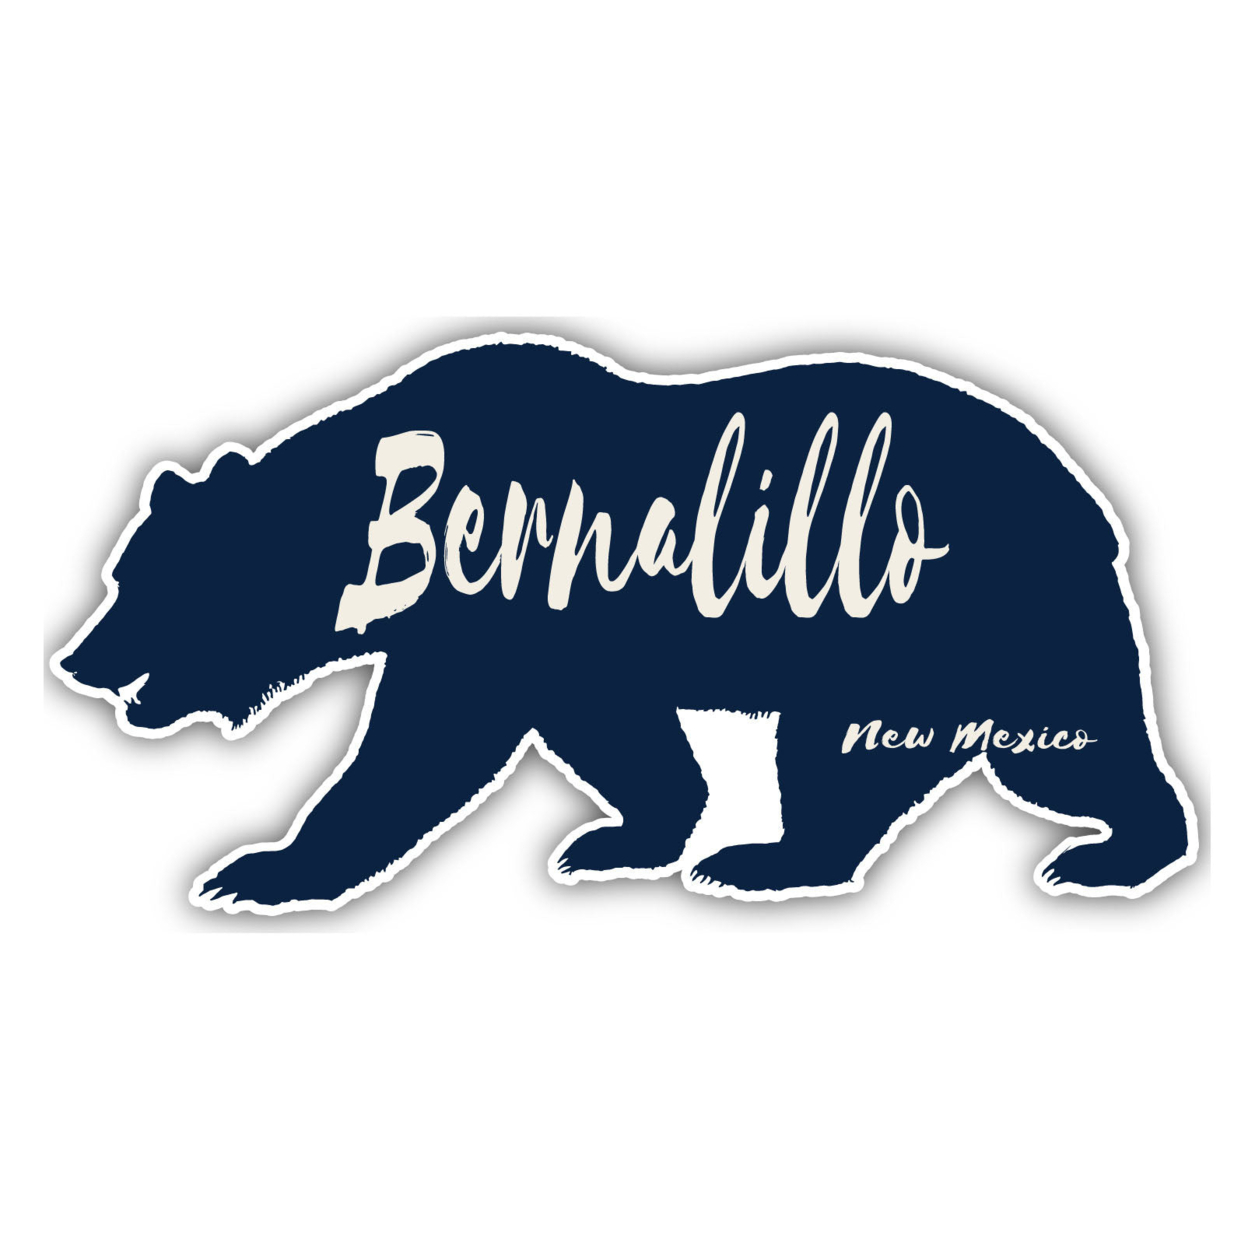 Bernalillo New Mexico Souvenir Decorative Stickers (Choose Theme And Size) - 4-Pack, 12-Inch, Tent